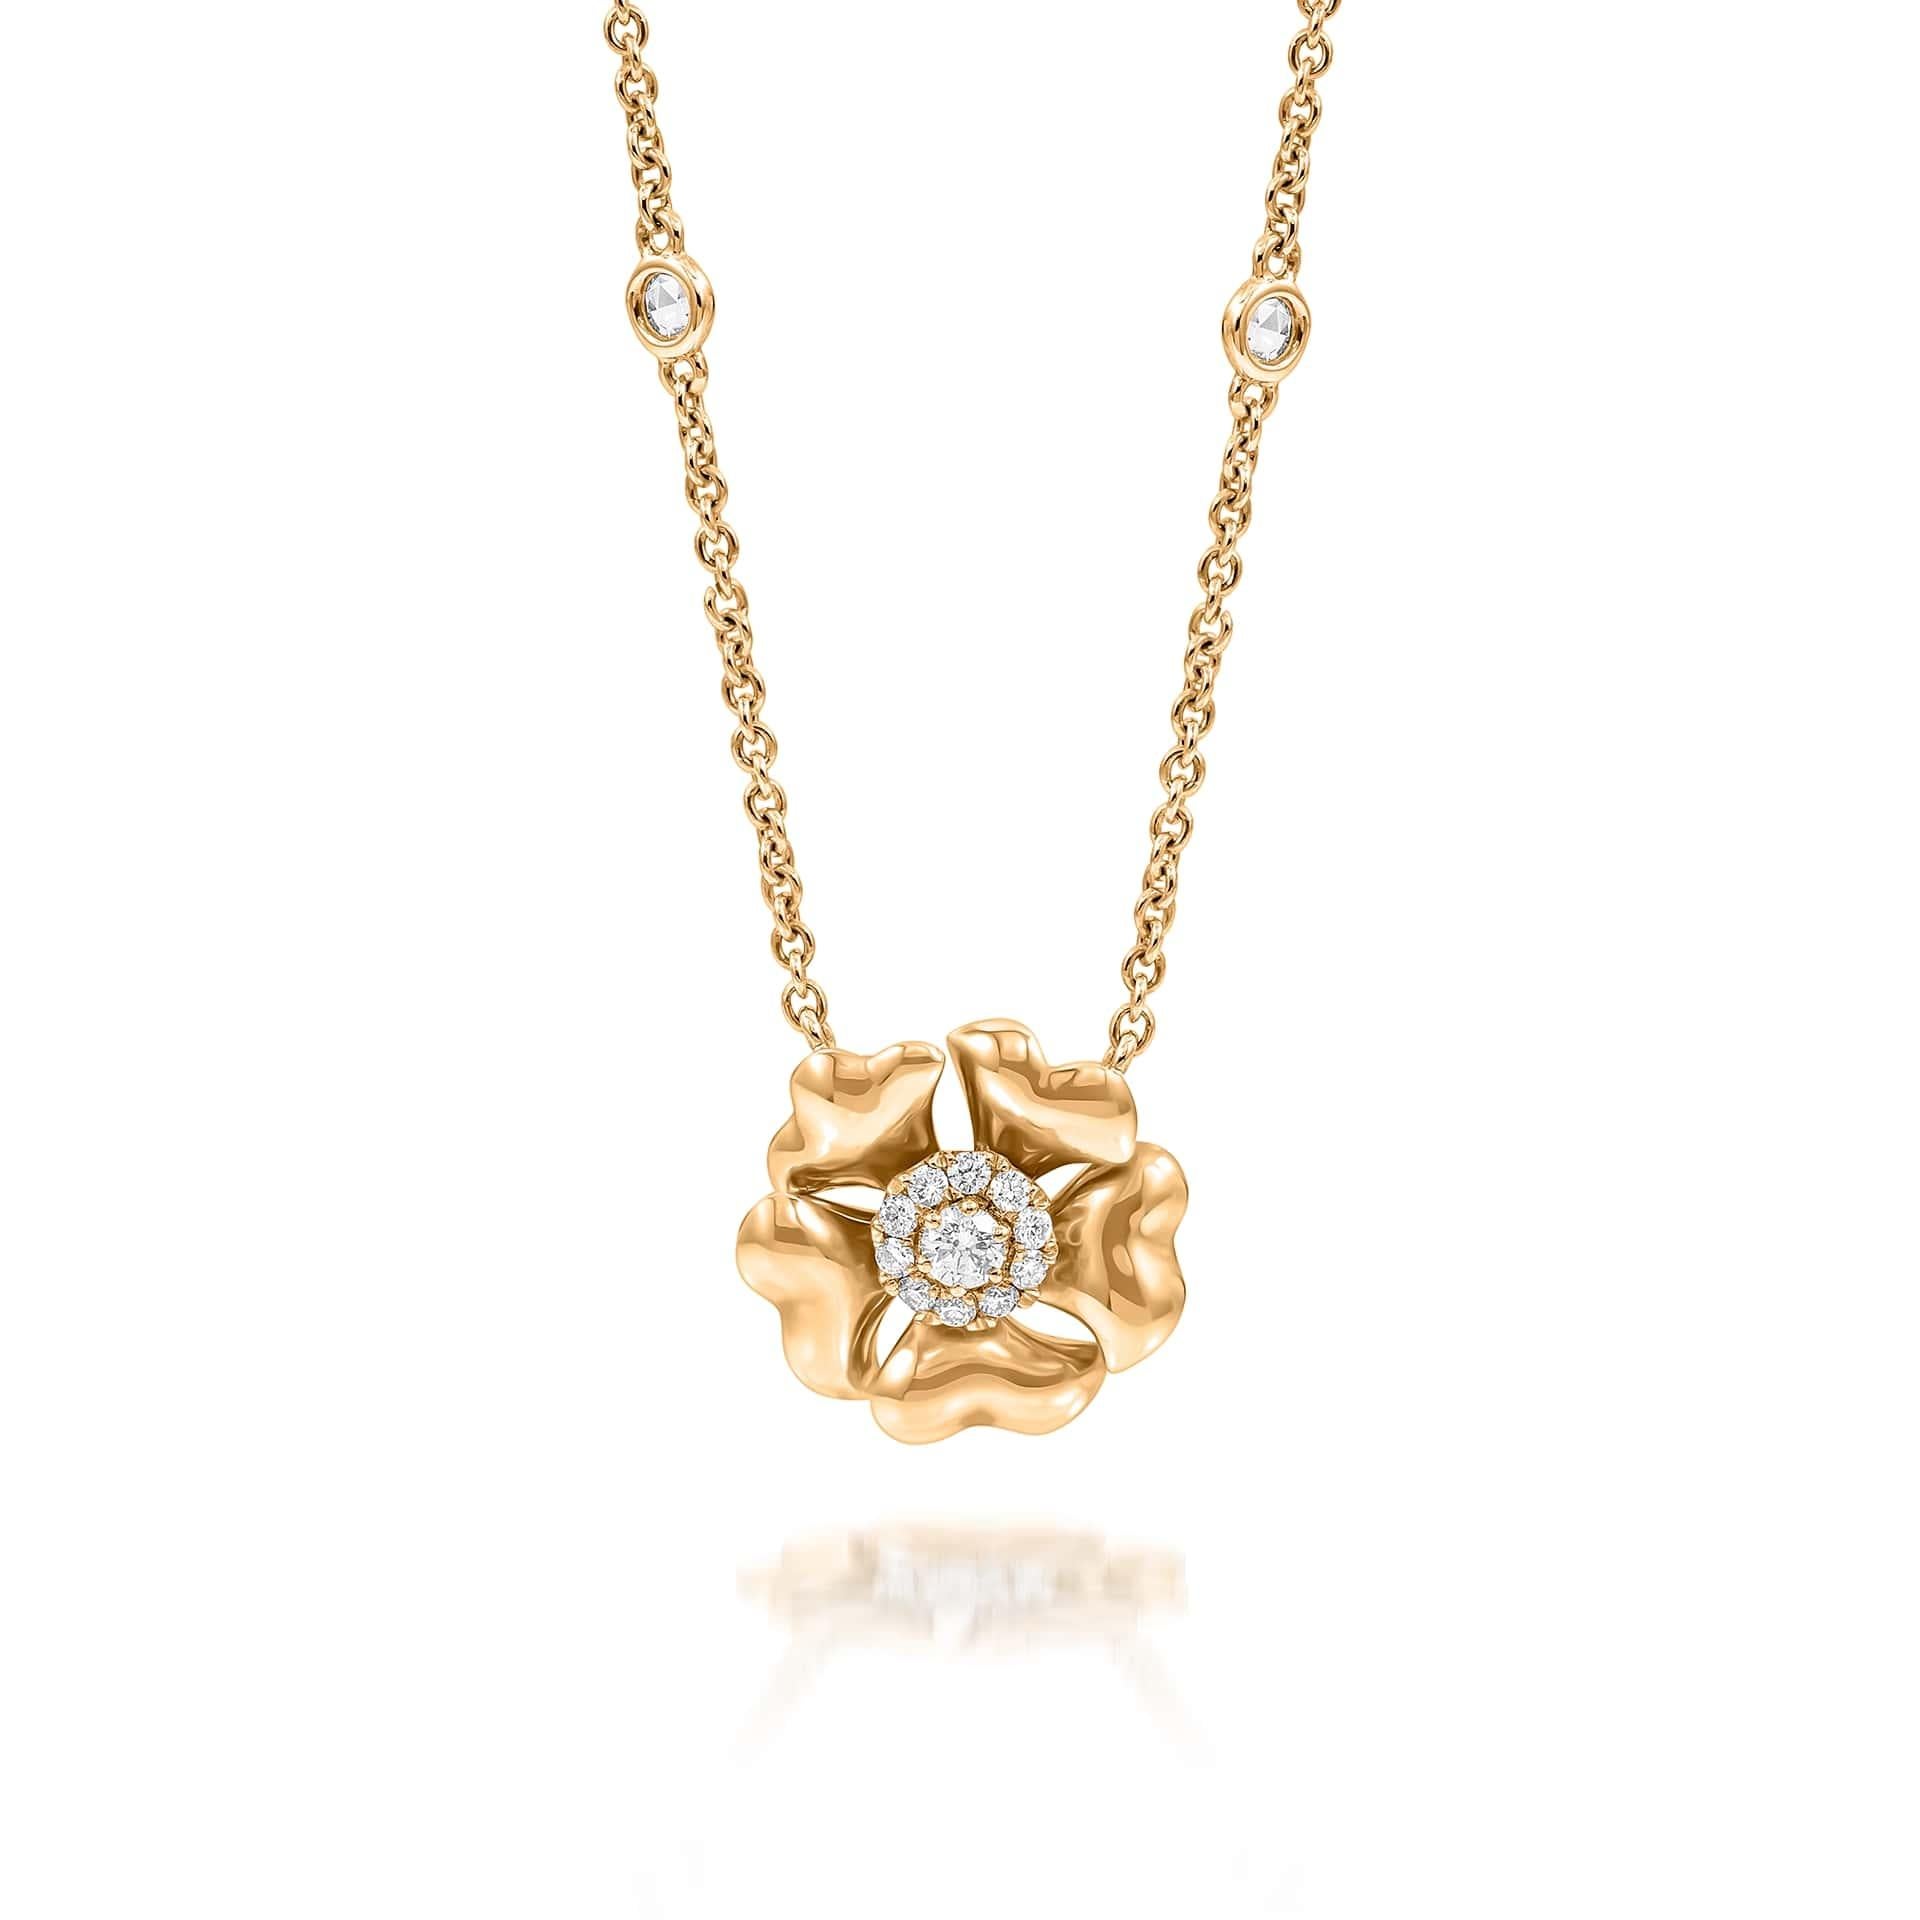 Bloom Gold and Diamond Flower Halo Necklace in 18K Yellow Gold

Inspired by the exquisite petals of the alpine cinquefoil flower, the Bloom collection combines the richness of diamonds and precious metals with the light versatility of this delicate,